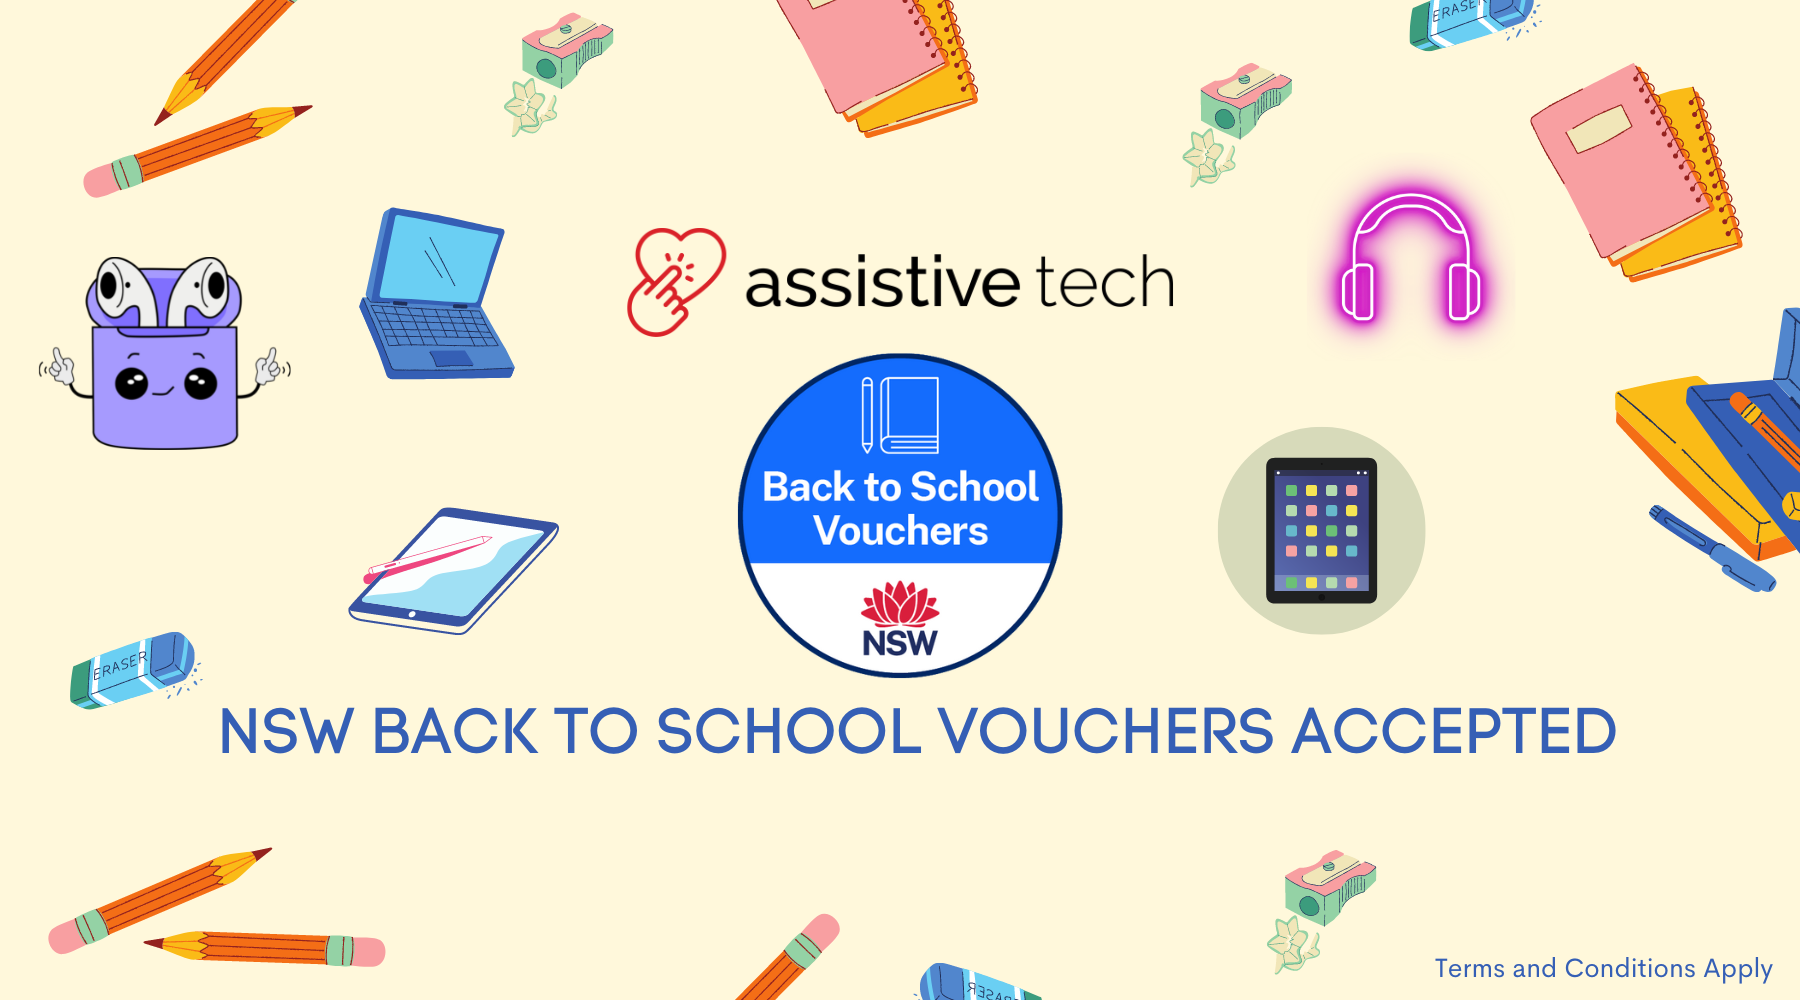 Premier's Back to School NSW Vouchers accepted at Assistive Tech